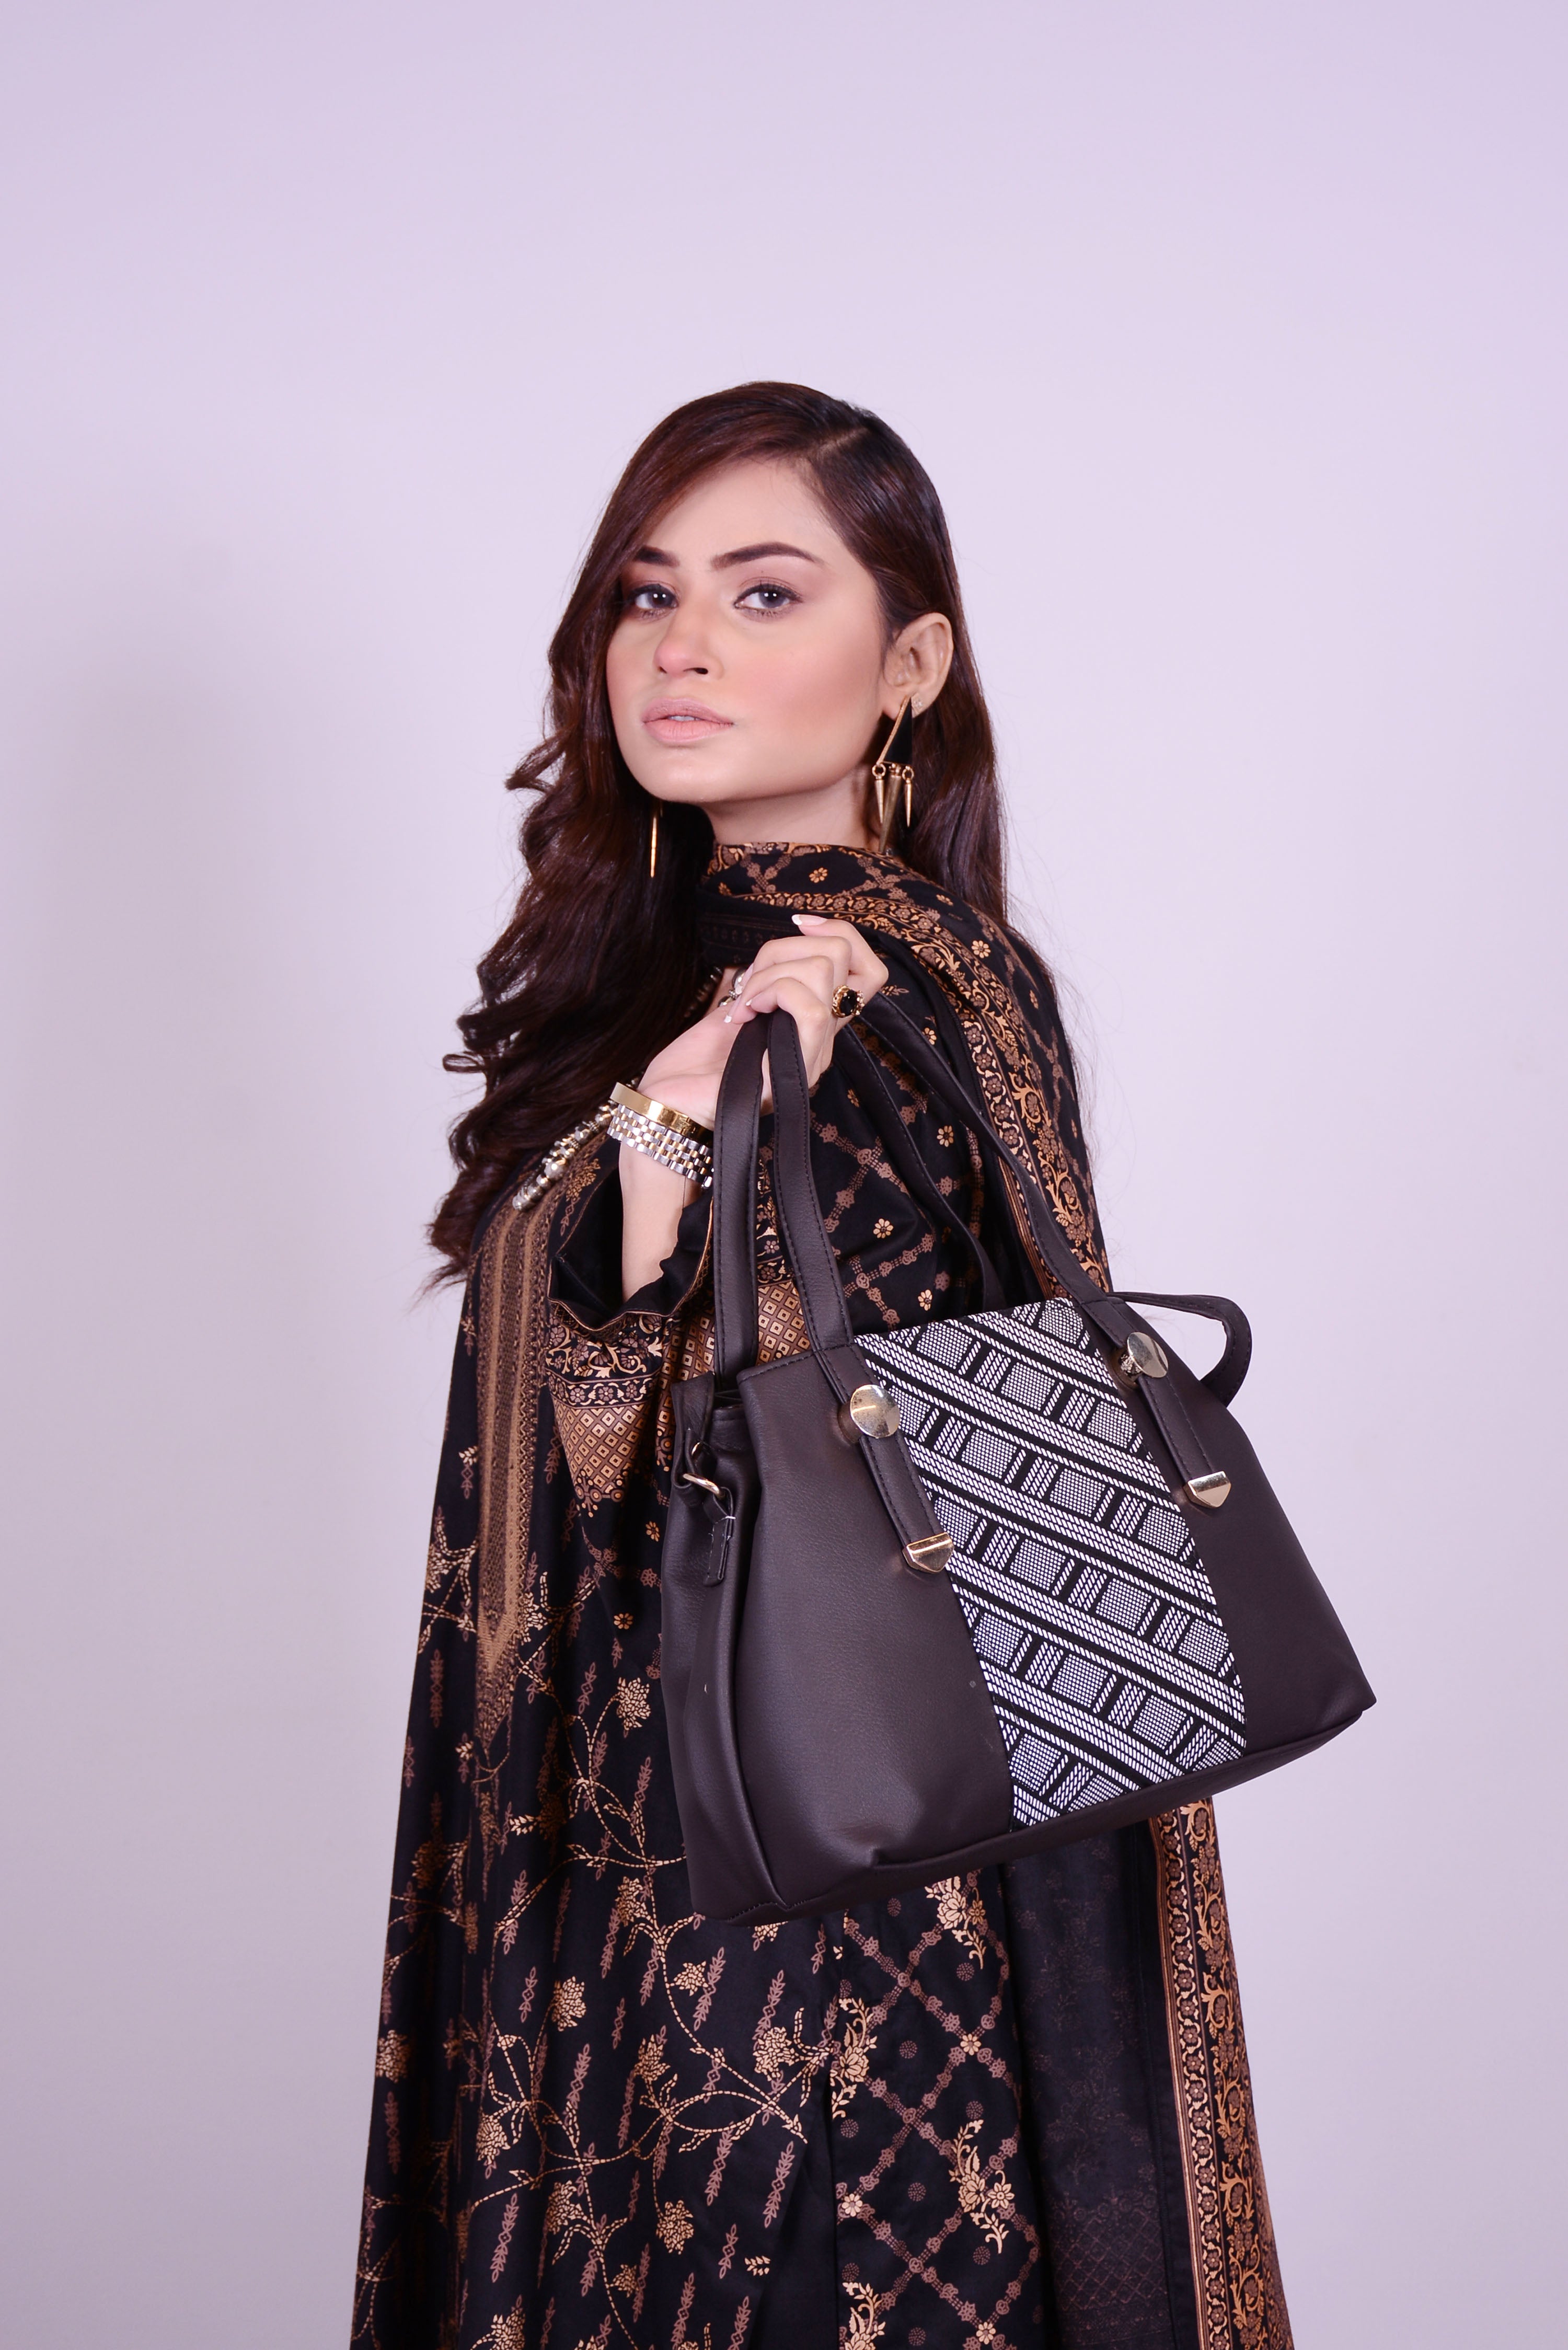 Hand Bags for Women |Ladies Purse I30-12 Charcoal